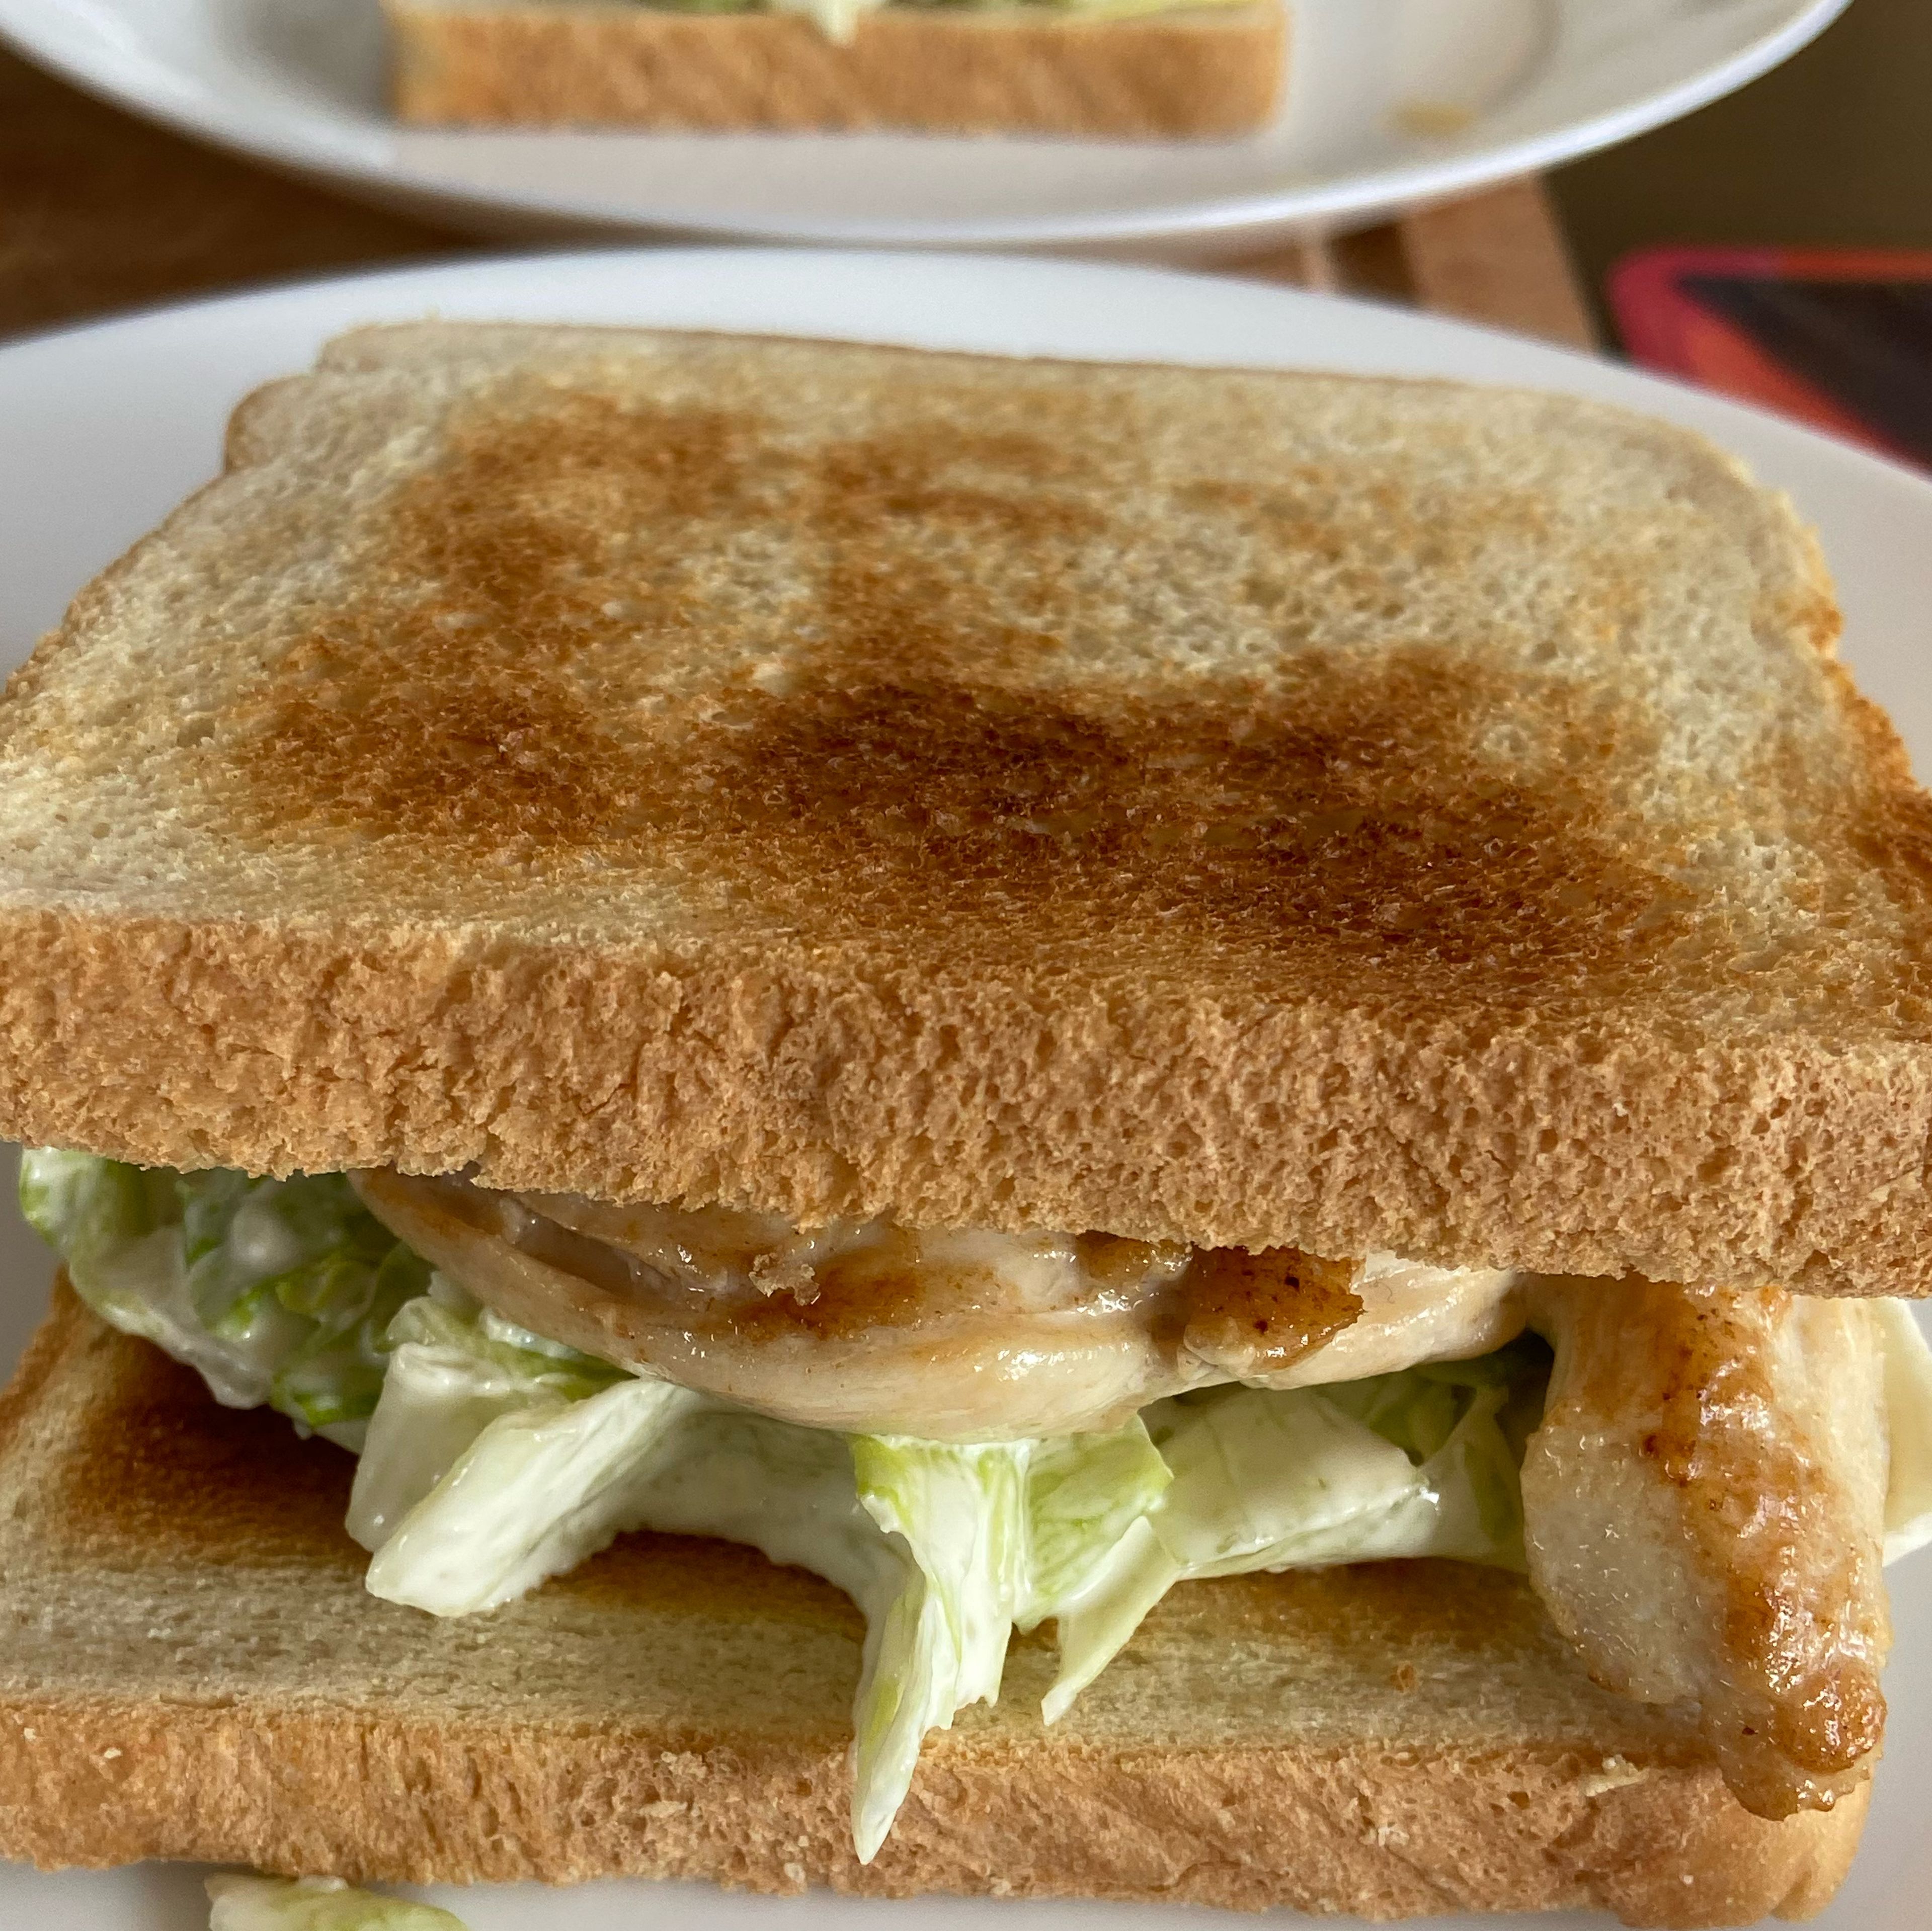 Lay the first bread slice and add a generous portion of the lettuce with the sauce, add the chicken breast on top, 2 bacon strips on the chicken and another slice of bread.